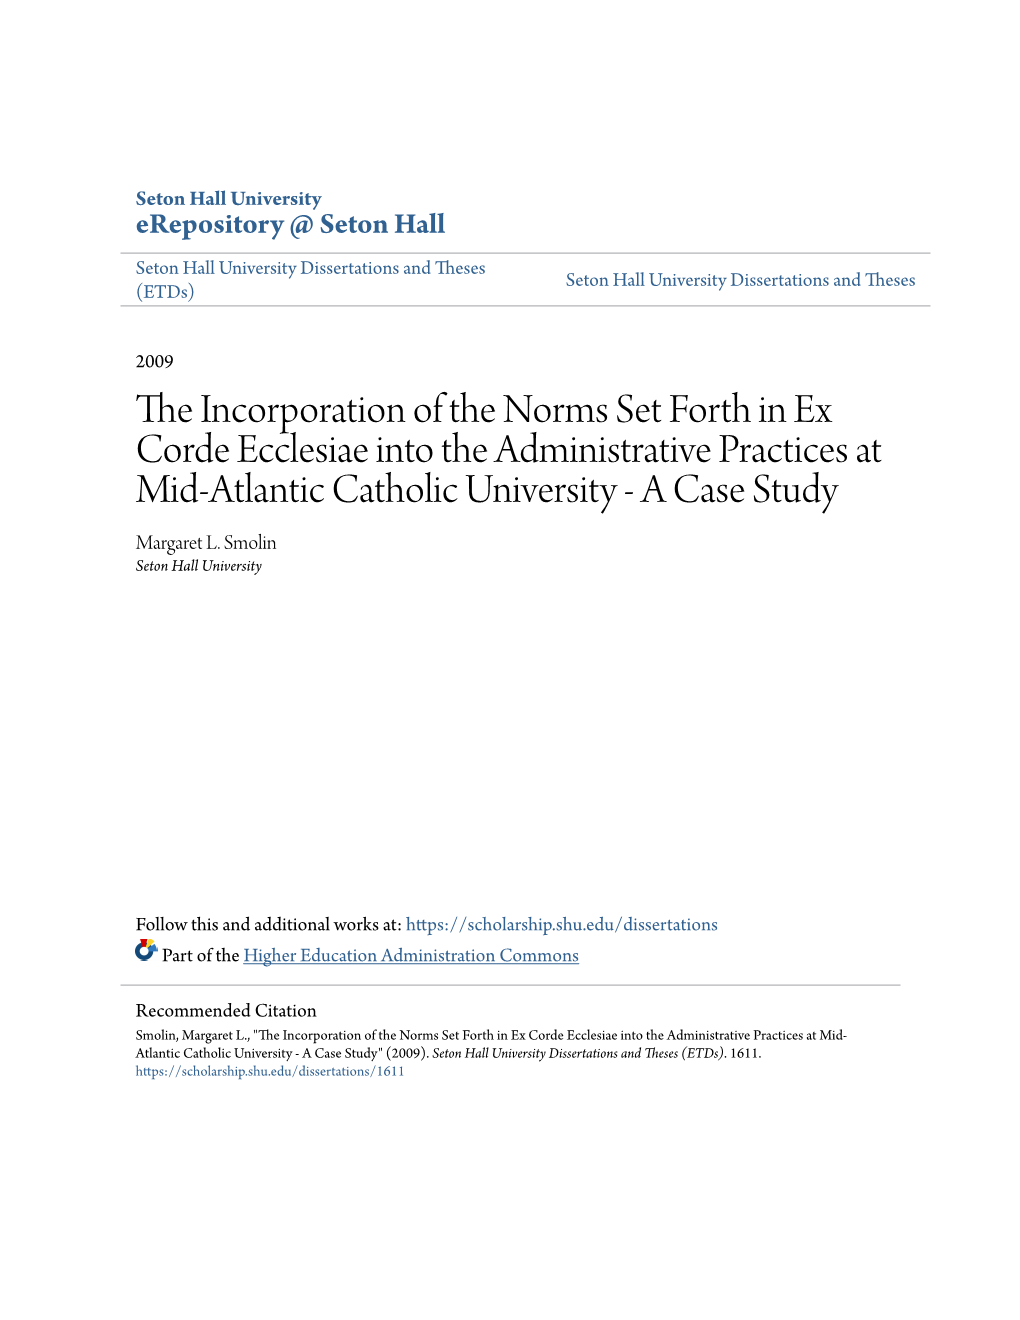 The Incorporation of the Norms Set Forth in Ex Corde Ecclesiae Into the Administrative Practices at Mid-Atlantic Catholic University - a Case Study